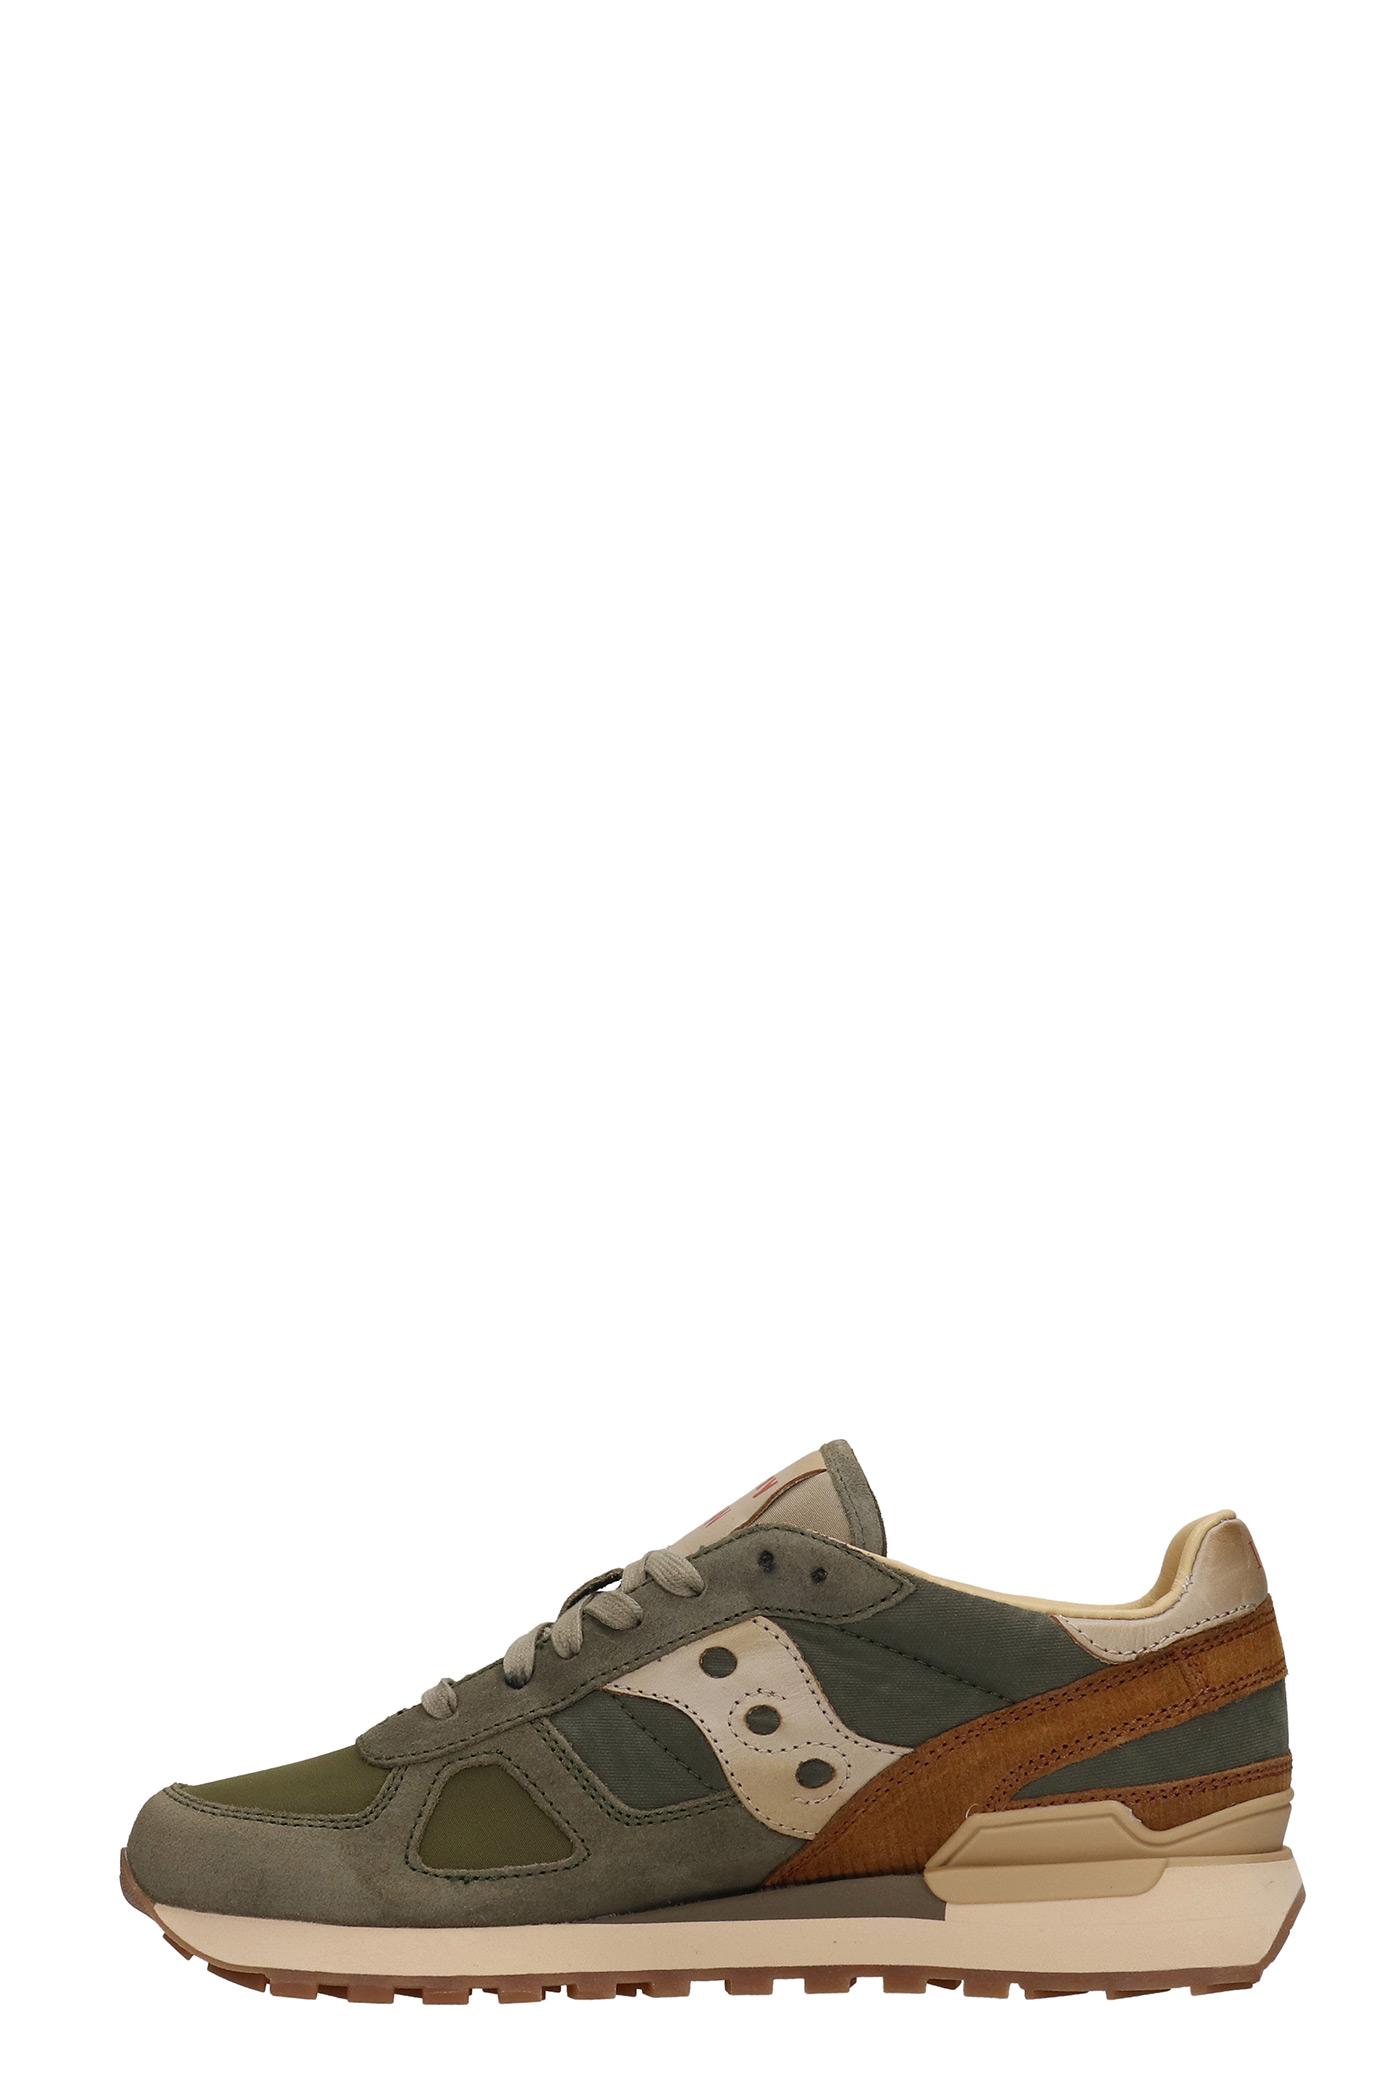 Saucony Shadow Original Sneakers In Green Suede And Fabric for Men - Save  44% | Lyst